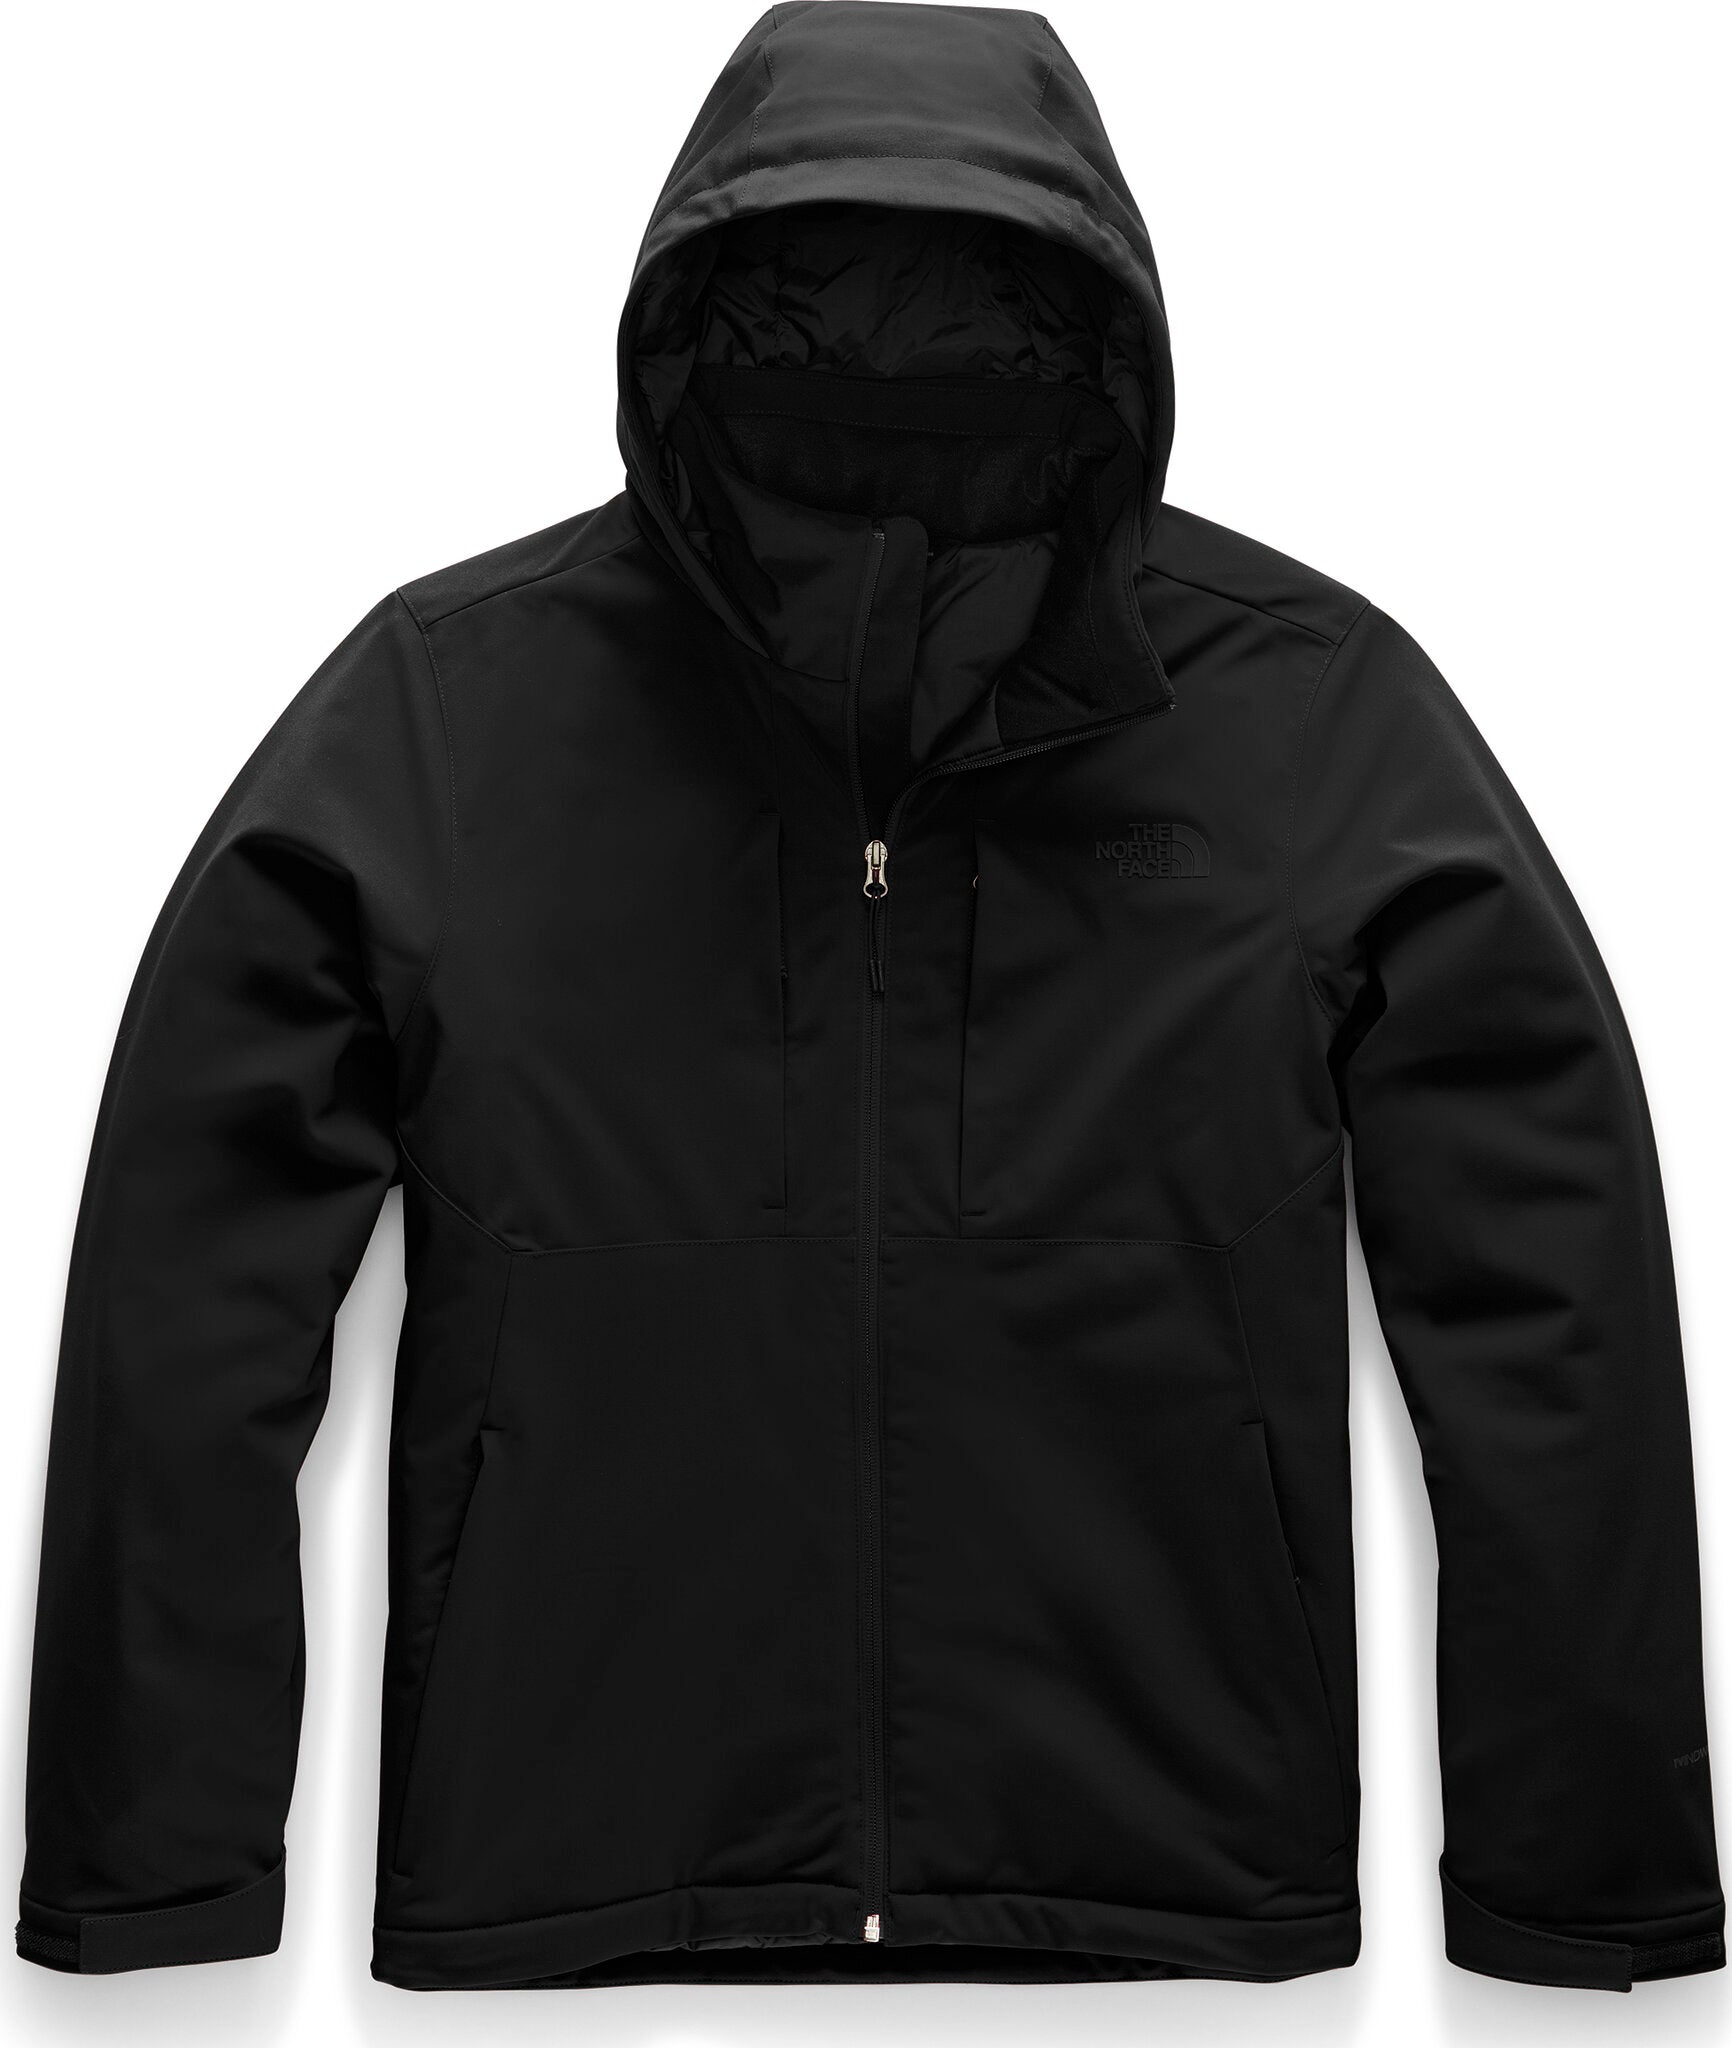 THE NORTH FACE Men's Apex Elevation Jacket - Eastern Mountain Sports